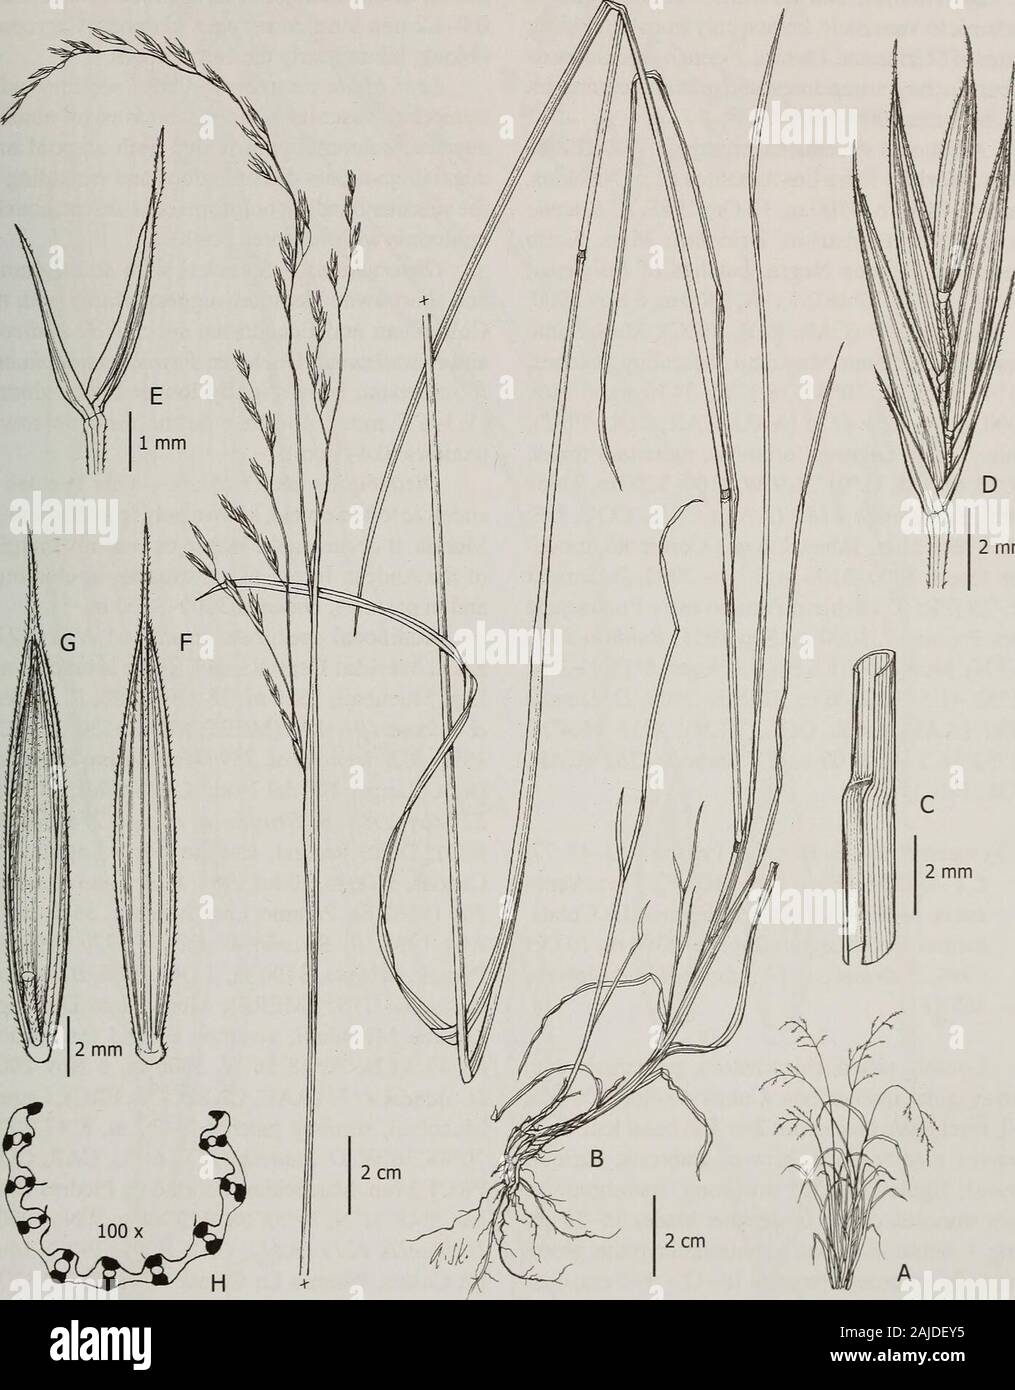 Contributions from the United States National Herbarium . cm long, 2-5 cm wide, flexuous,pendant; branches scabrous. Spikelets 9-11 mmlong, florets 3 or 4; rachilla ca. 1.2 mm long, pilose;glumes 2.5-6 mm long, narrowly lanceolate, coria-ceous, purplish, pilose, apex acute; lower glumes2.5-3.5 mm long, 1-nerved; upper glumes 4.5-6 mmlong, 3-nerved; lemmas 7.5-8.5 mm long, 5-nerved,lanceolate, membranous to coriaceous, margins shortpilose, apex entire, awned or awnless, pilose, the awn0-0.5 mm long; paleas as long as the lemma, pilose;lodicules ca. 0.8 mm long, oblong; anthers 2-2.5 mmlong; ova Stock Photo